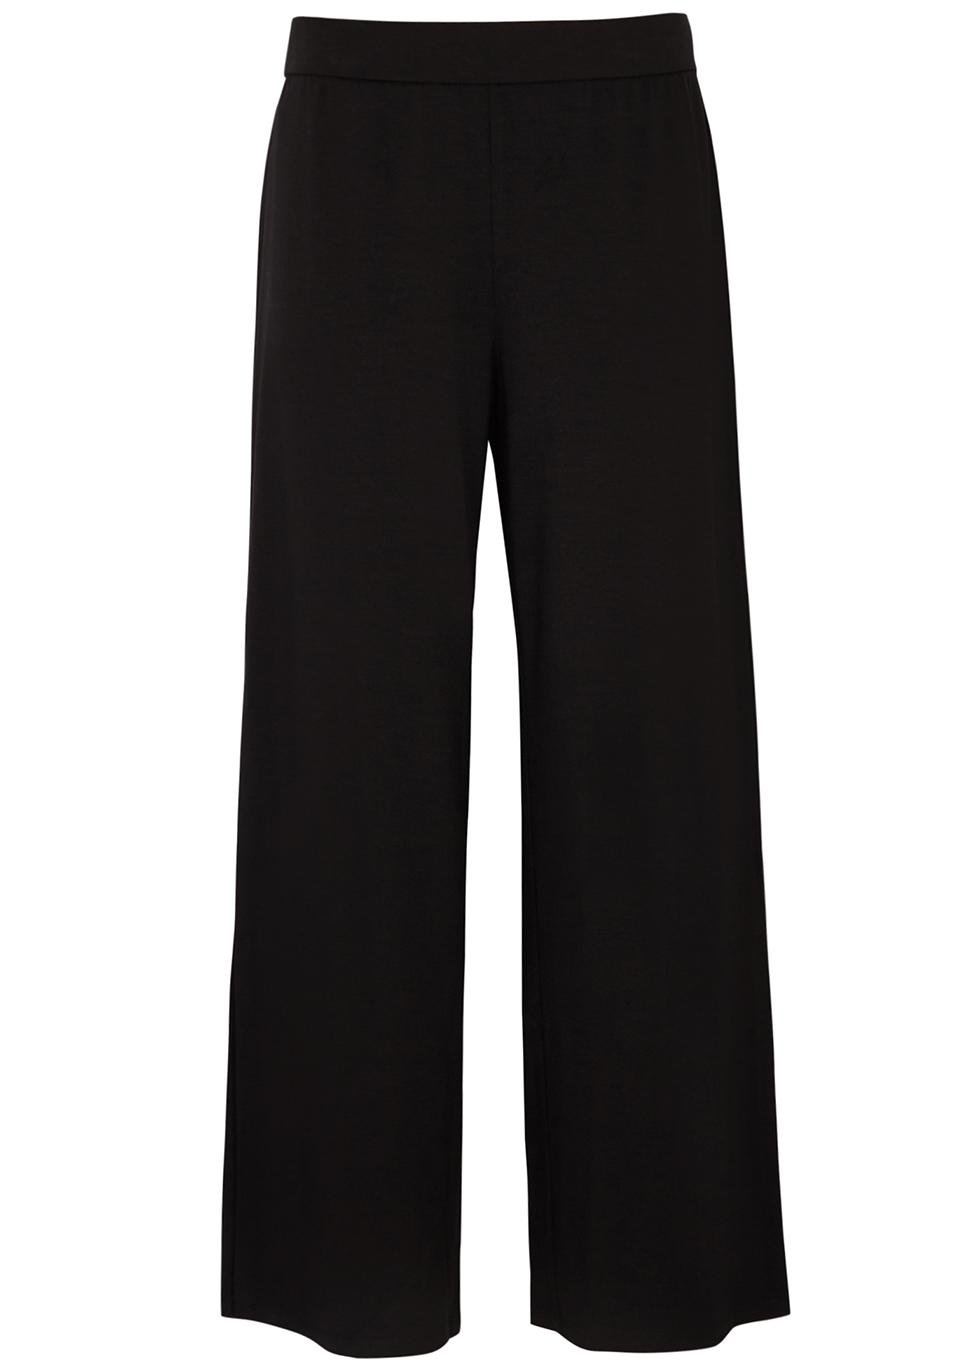 Wide-leg stretch-jersey trousers by EILEEN FISHER